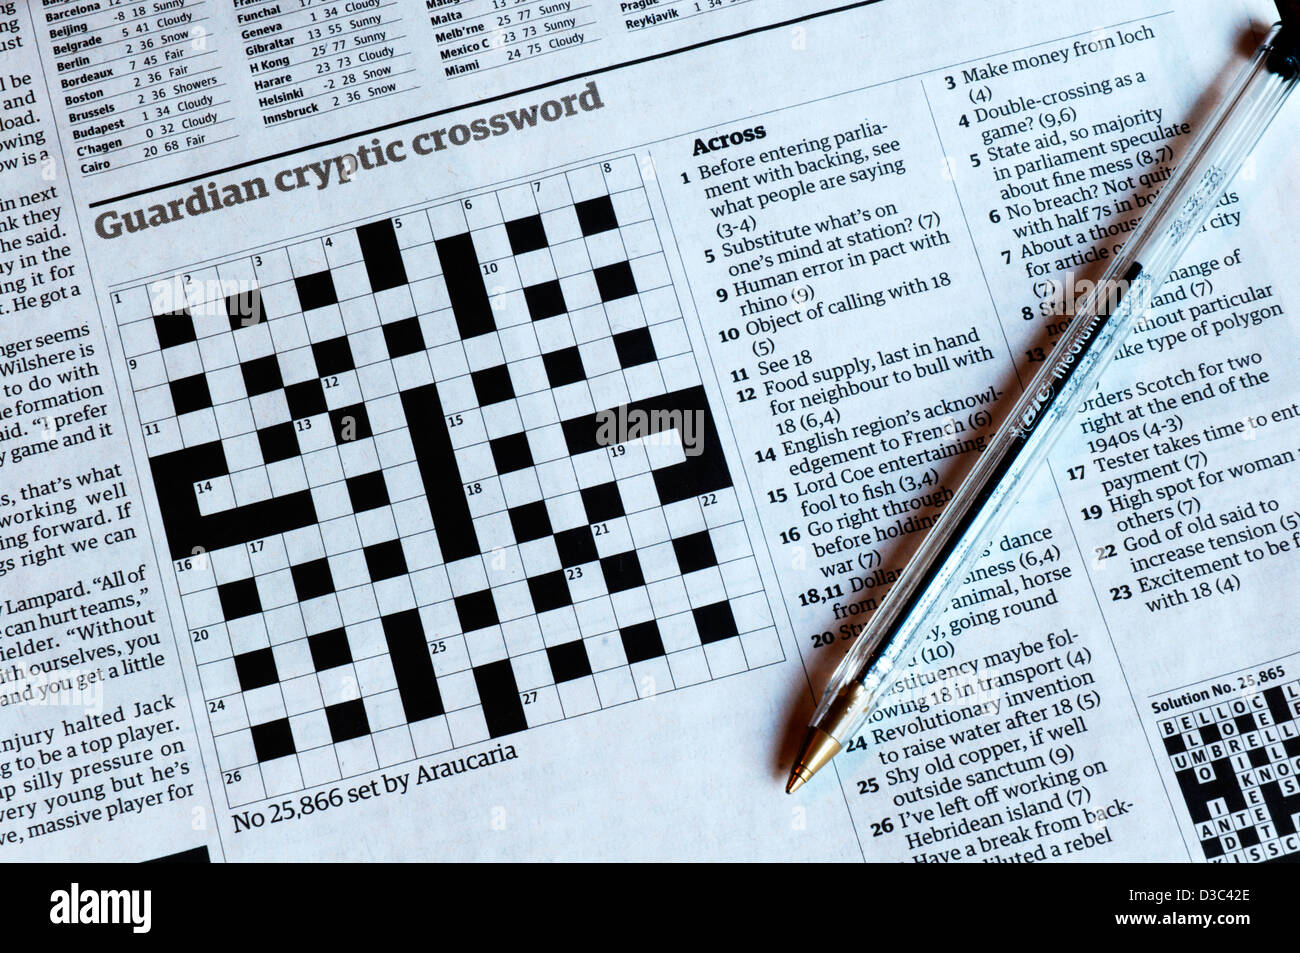 Blank Guardian cryptic crossword set by Araucaria (John Graham).  See D3C43N for partially completed version of puzzle. Stock Photo